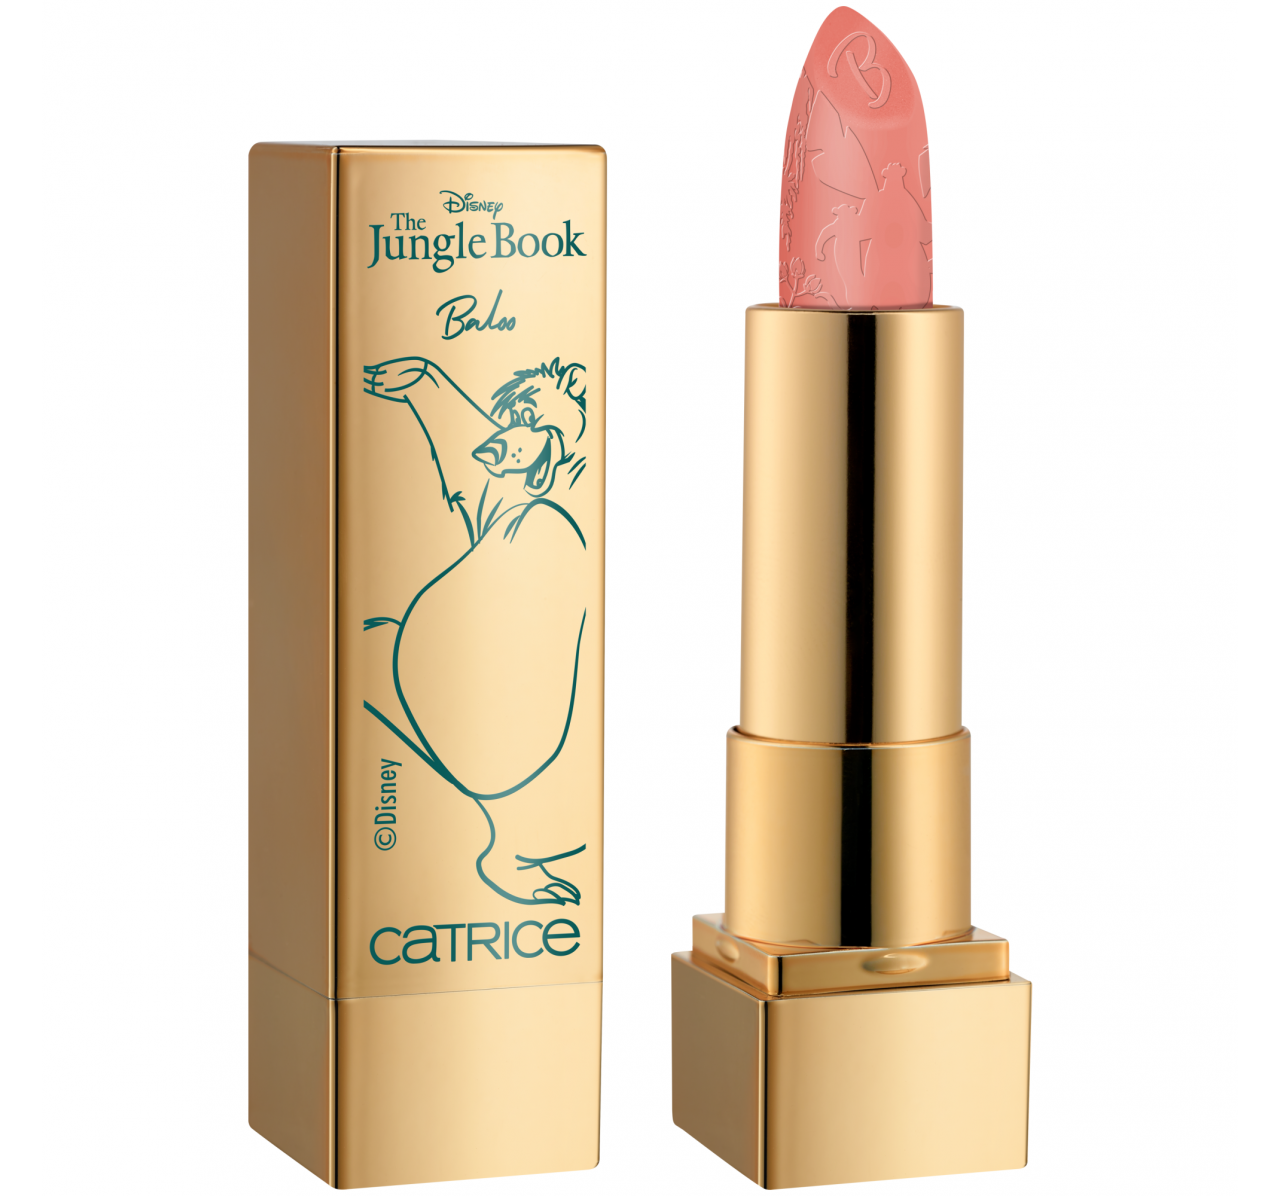 Go Catrice The Jungle The Balm 010 Flow 3g With Disney Book Lip